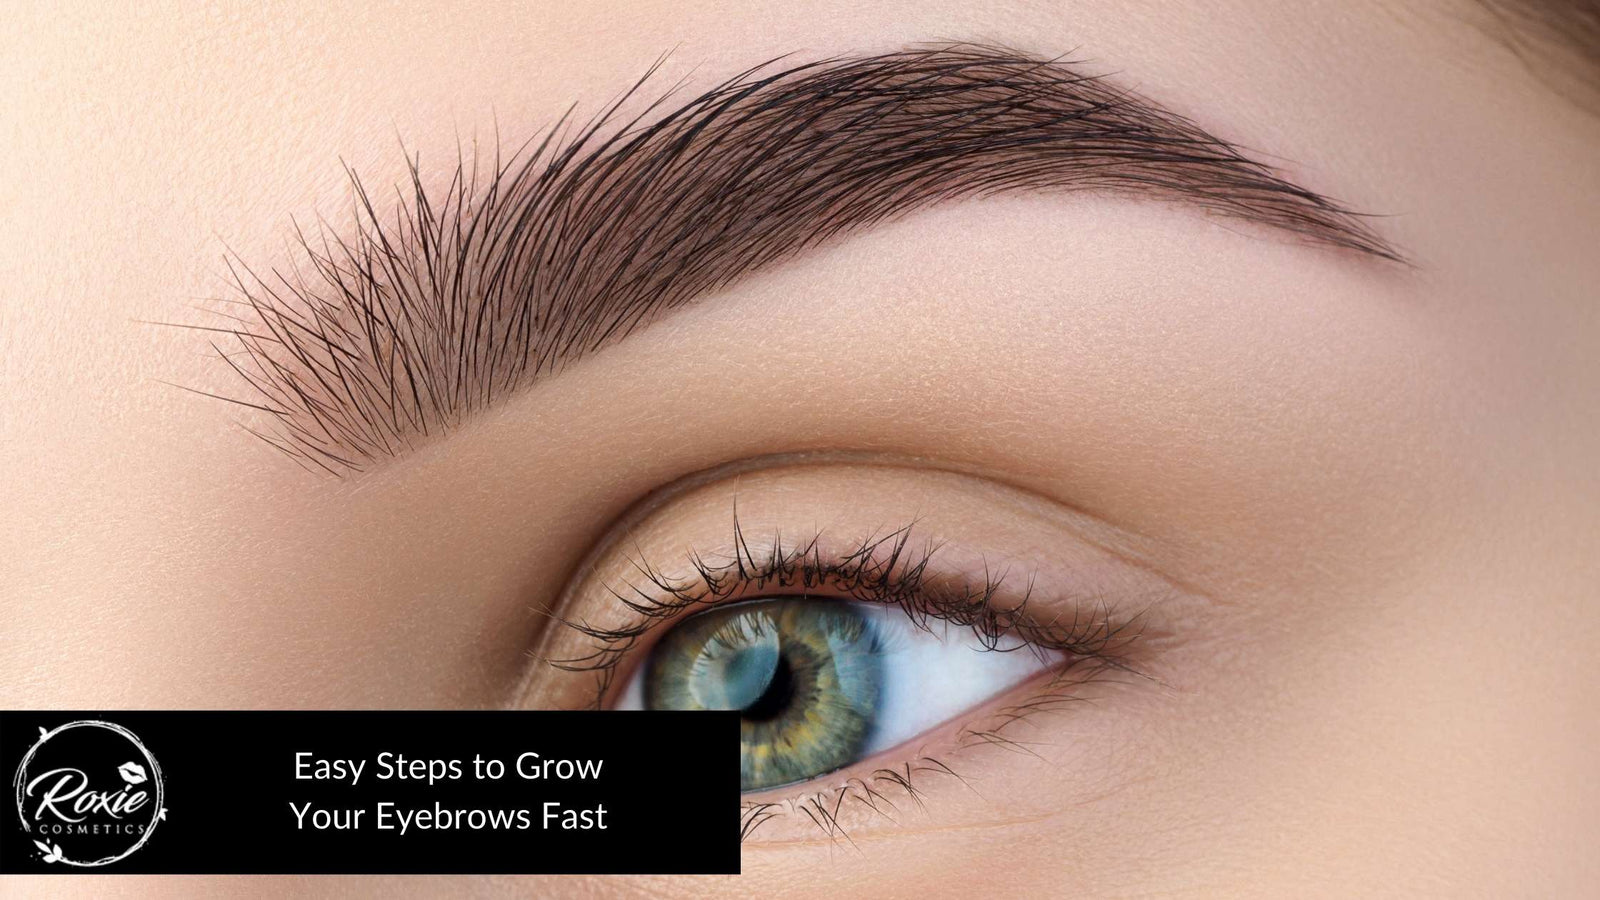 How to Grow Eyebrows